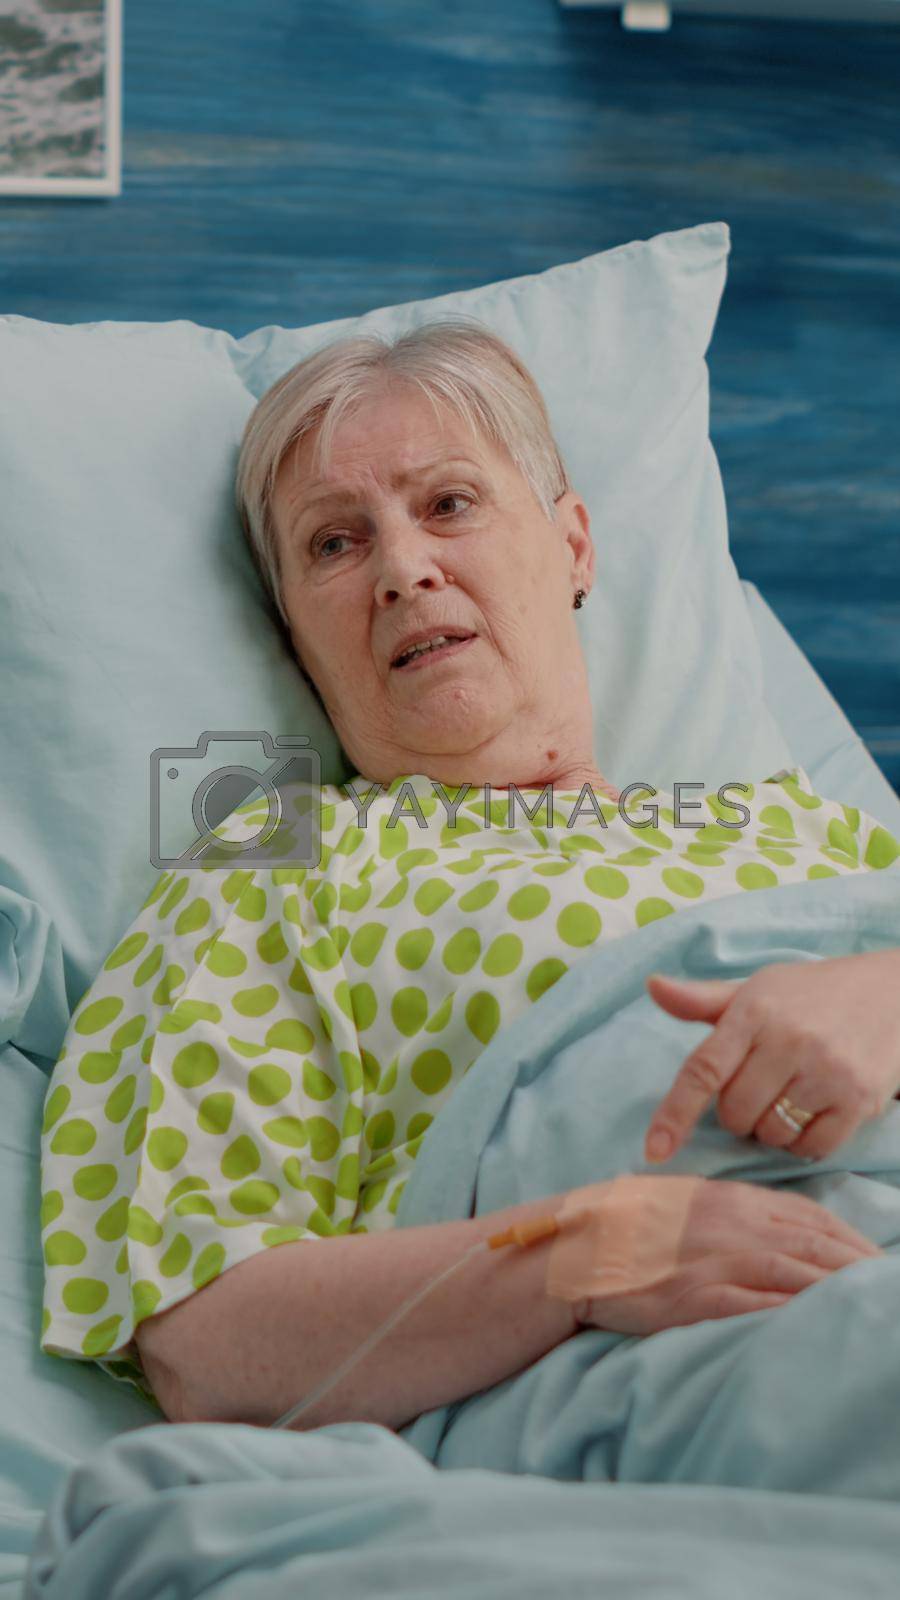 Doctor doing healthcare consultation with retired patient in bed at nursing home. Aged woman with illness talking to specialist about healing treatment and recovery with medication